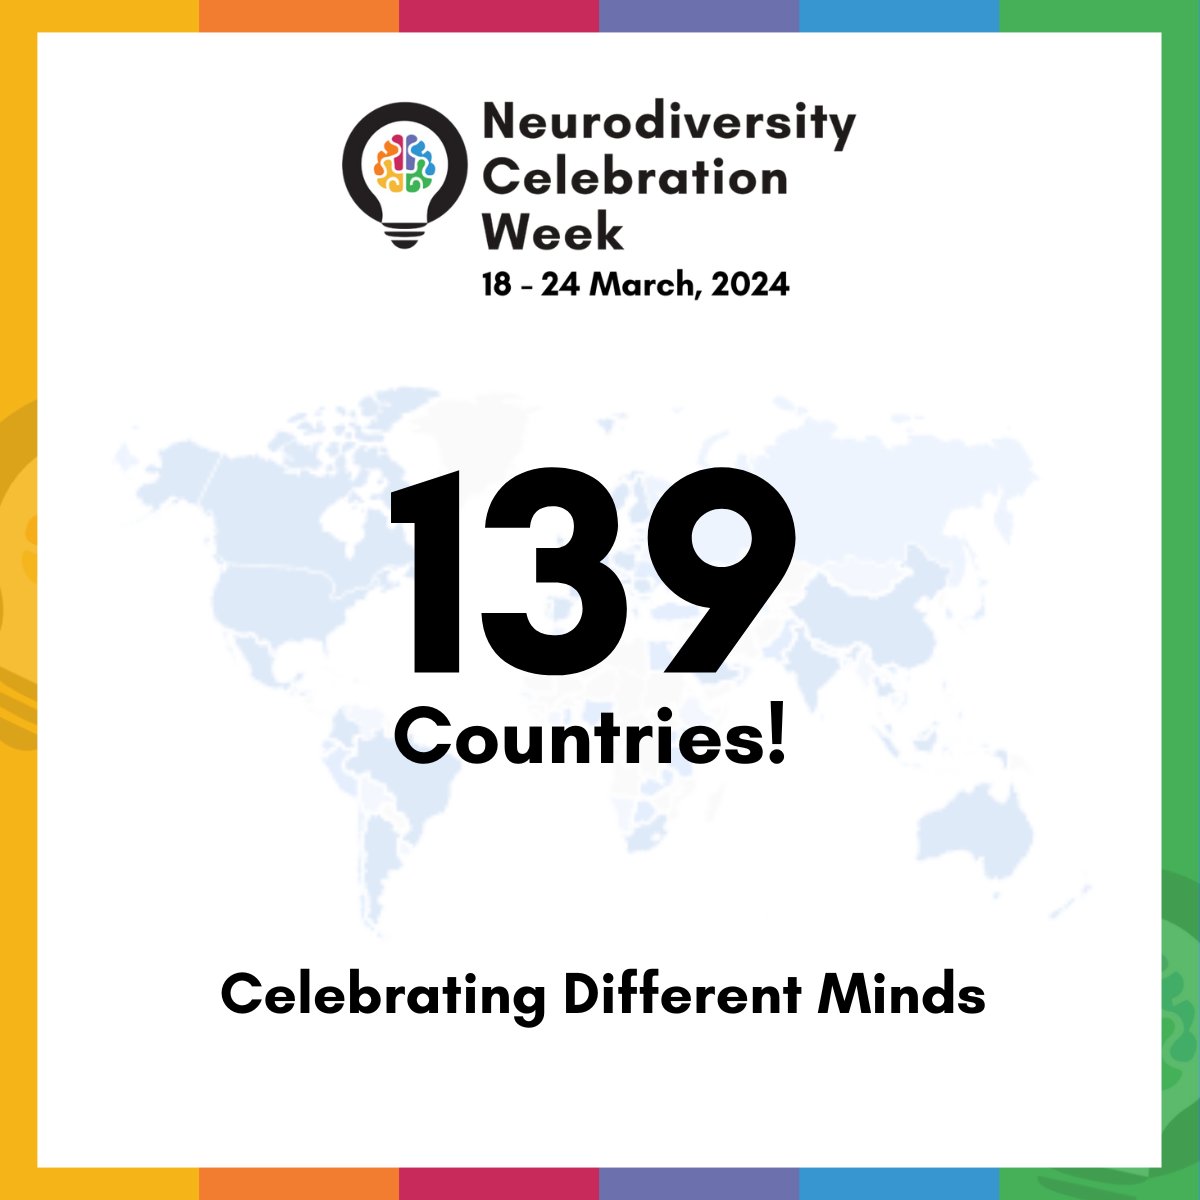 It's Day 6 of #NeurodiversityCelebrationWeek 2024! 🎉 #NCW has now reached over 139 countries (and counting!), and it has been incredible to see thousands of people around the world celebrating different minds this week🌟 neurodiversityweek.com #NeurodiversityWeek #ThisIsND